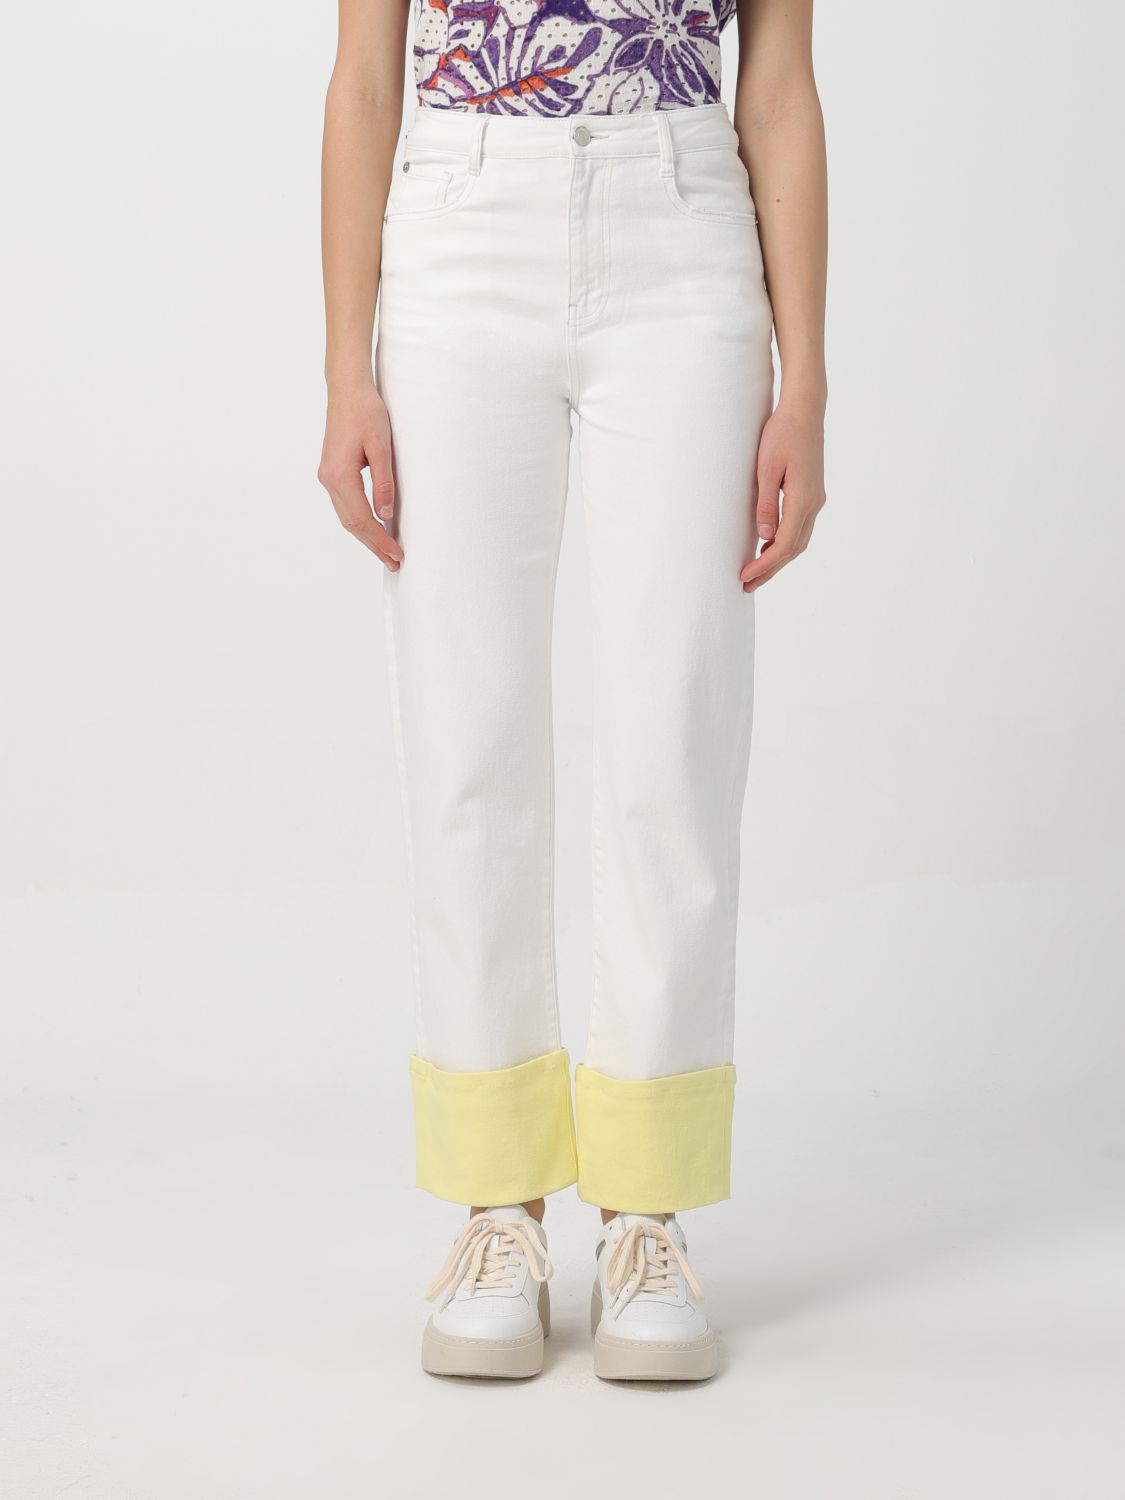 Actitude Twinset Trousers ACTITUDE TWINSET Woman colour White